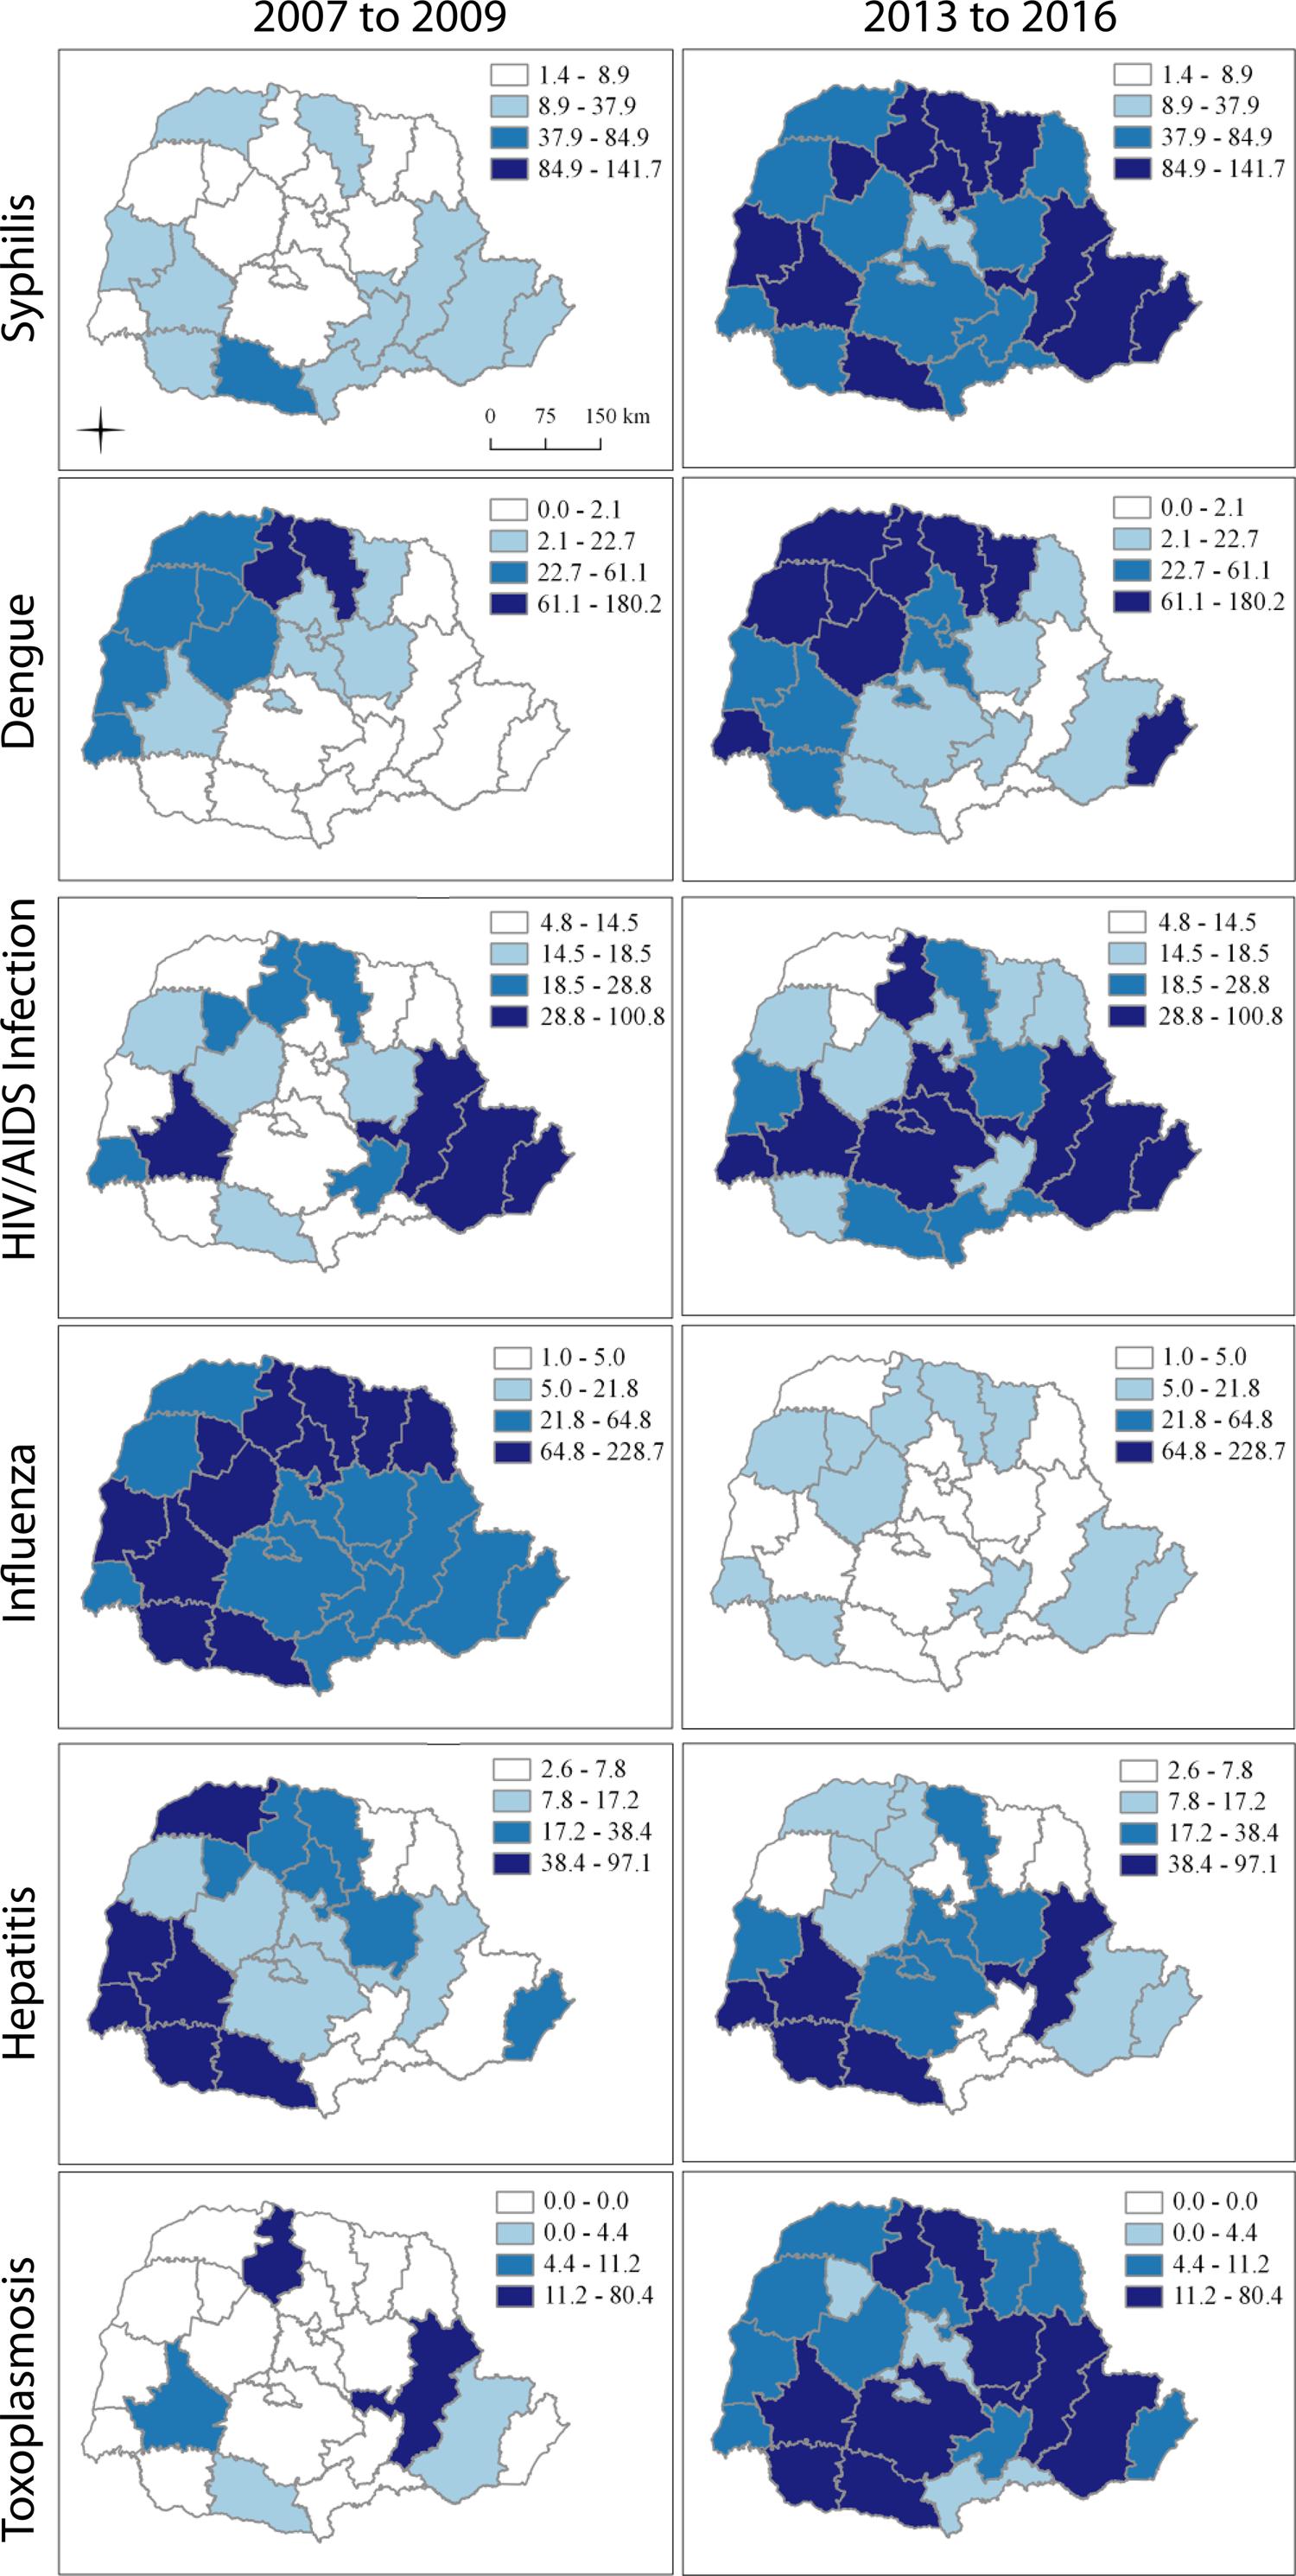 Trend and spatial distribution of infectious diseases in.